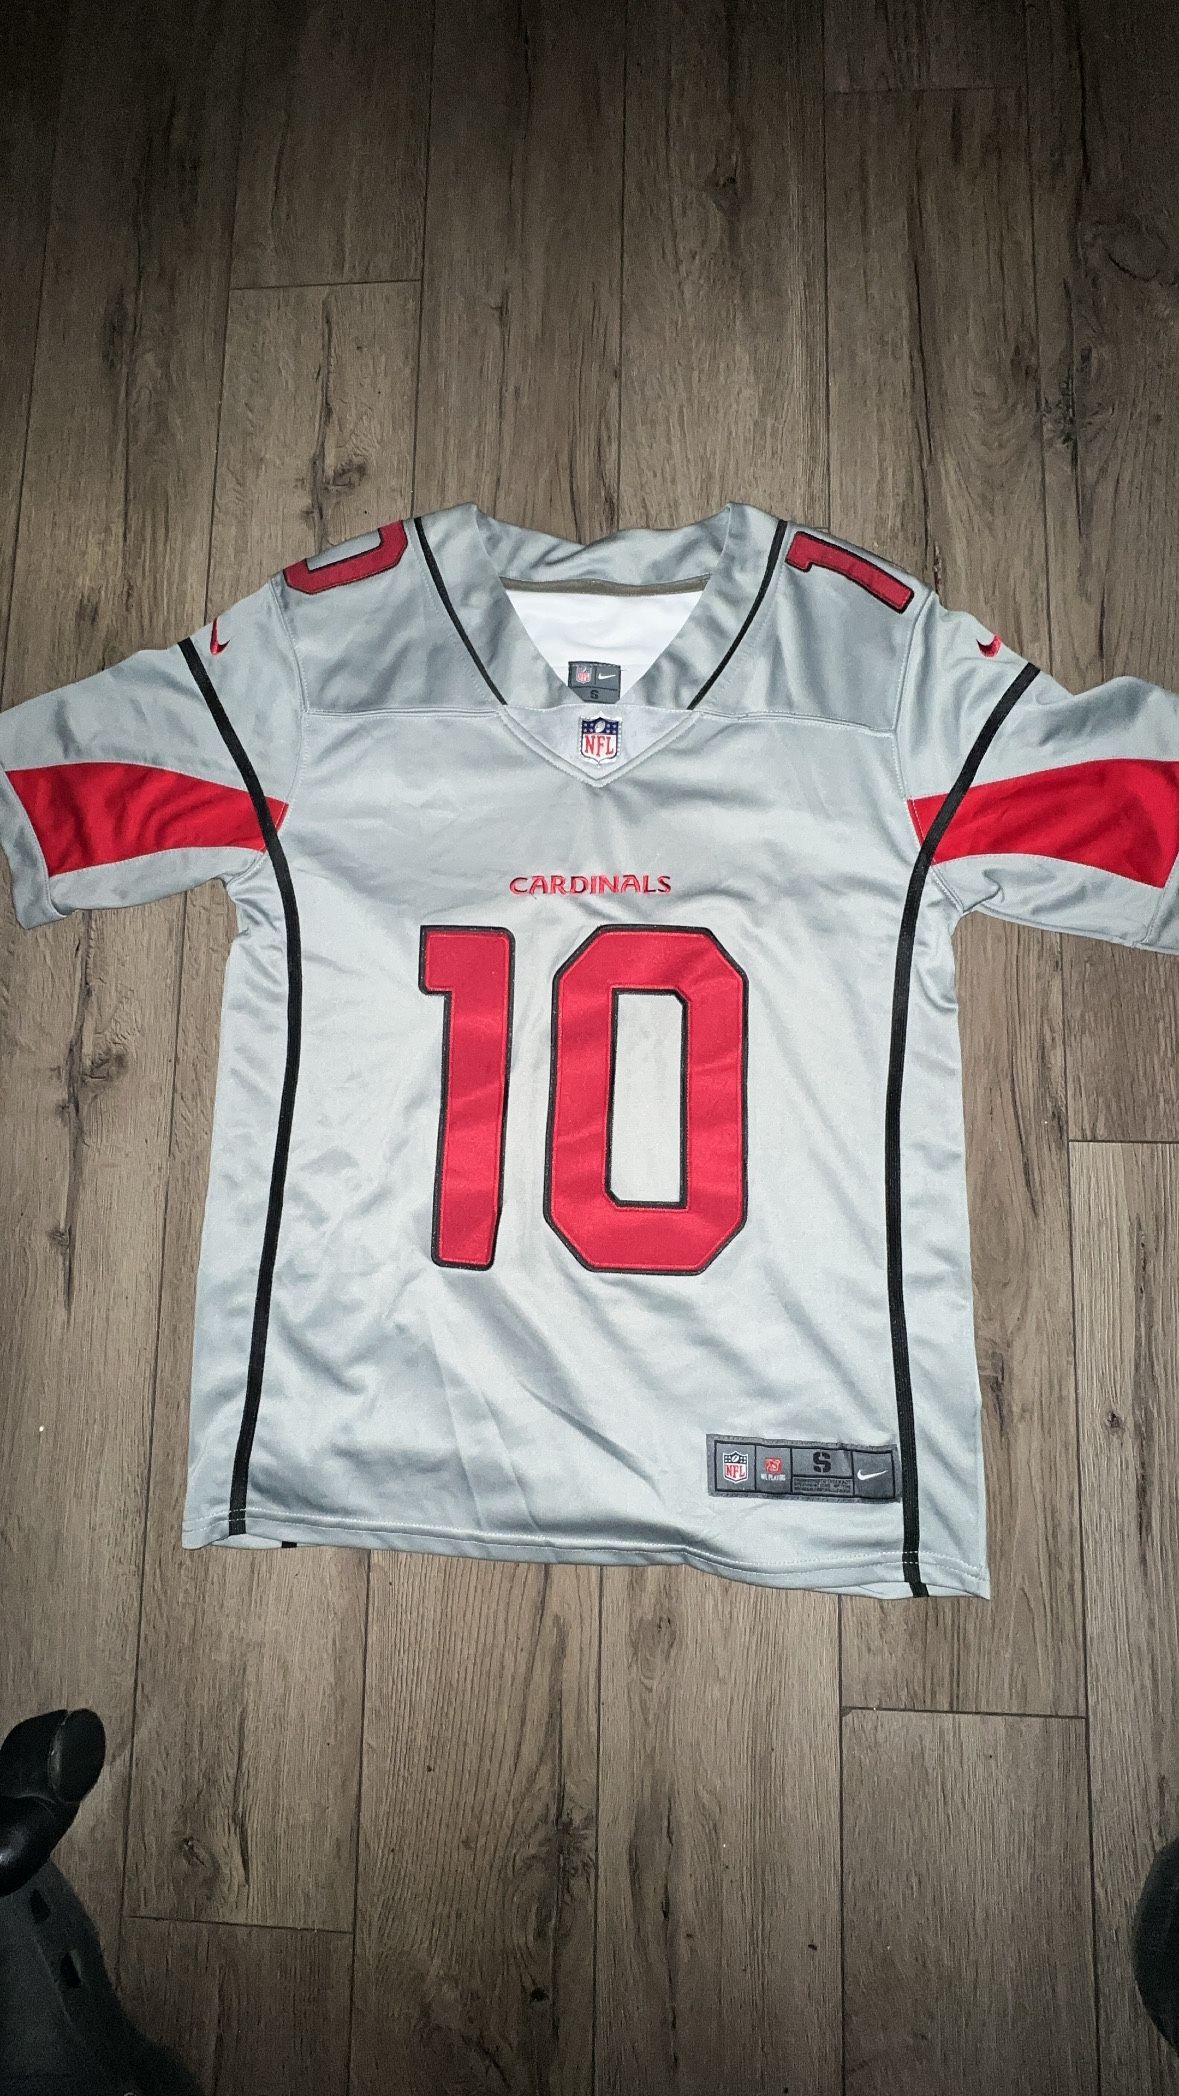 Hopkins Cardinals Jersey for Sale in El Paso, TX - OfferUp